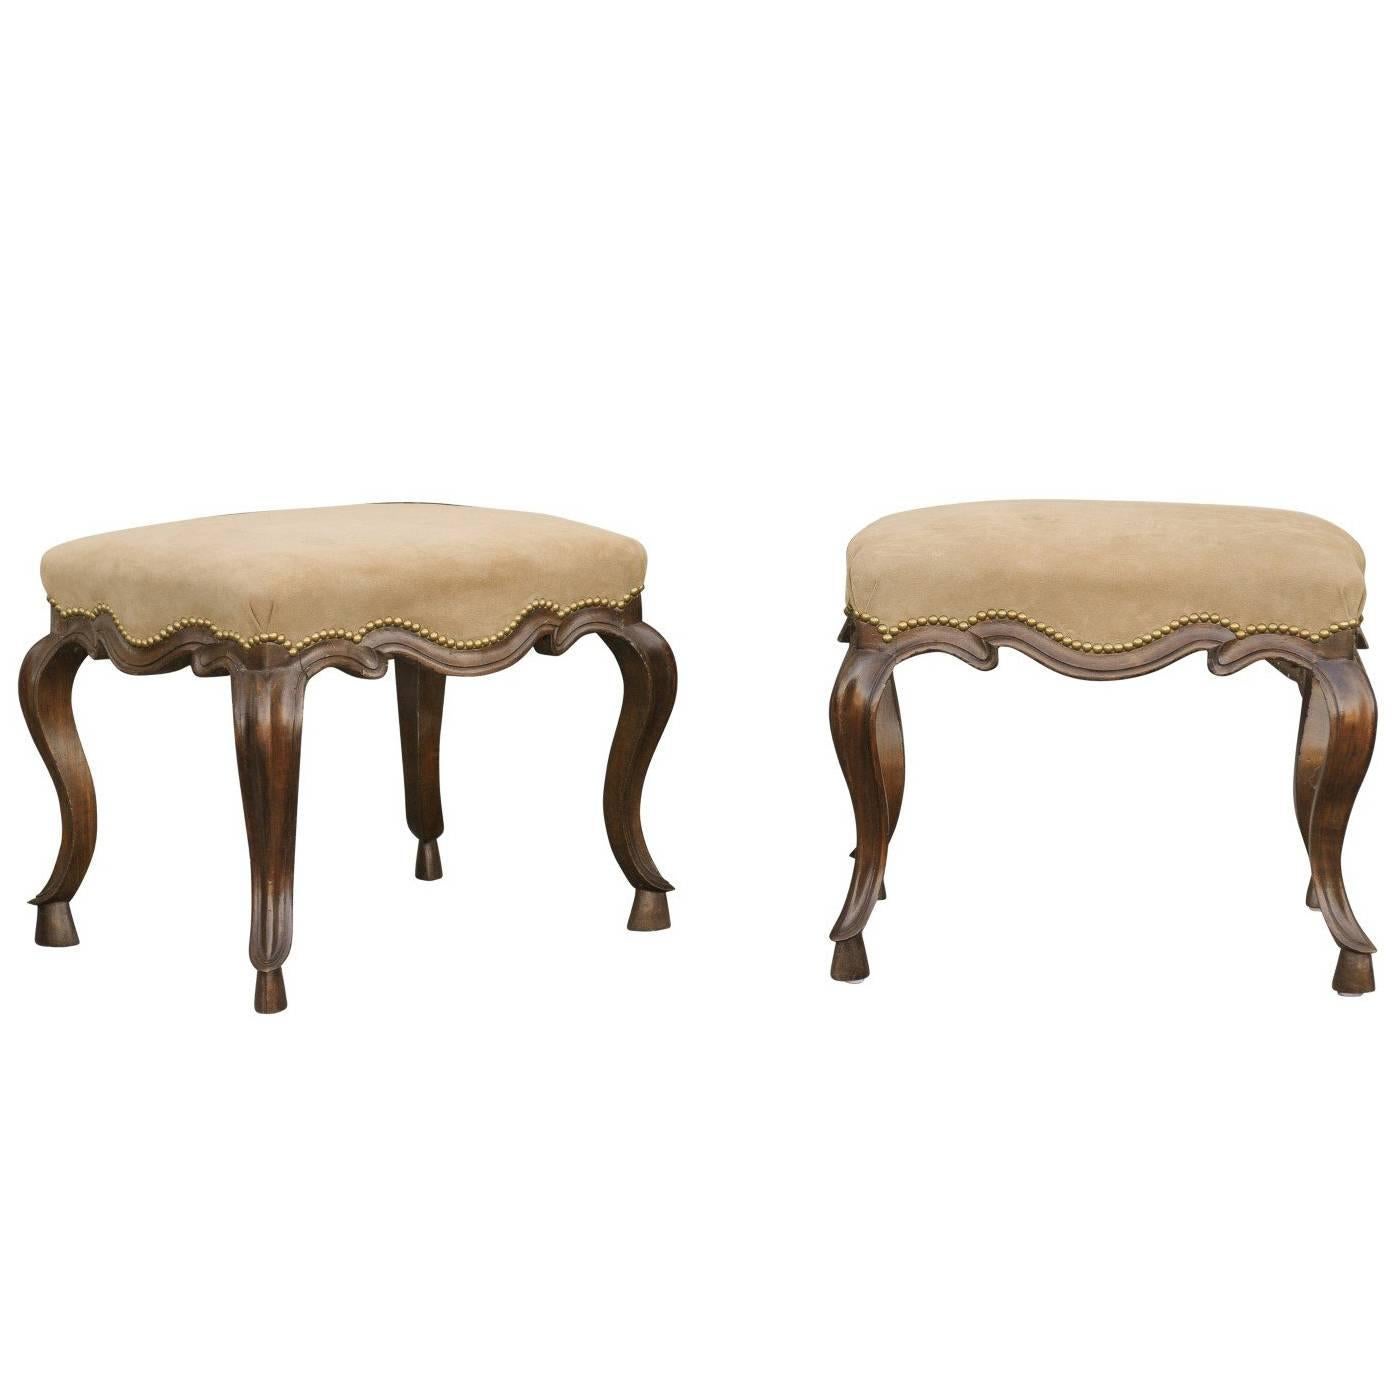 Pair of Italian 19th Century Rococo Style Walnut Stools with Suede Upholstery